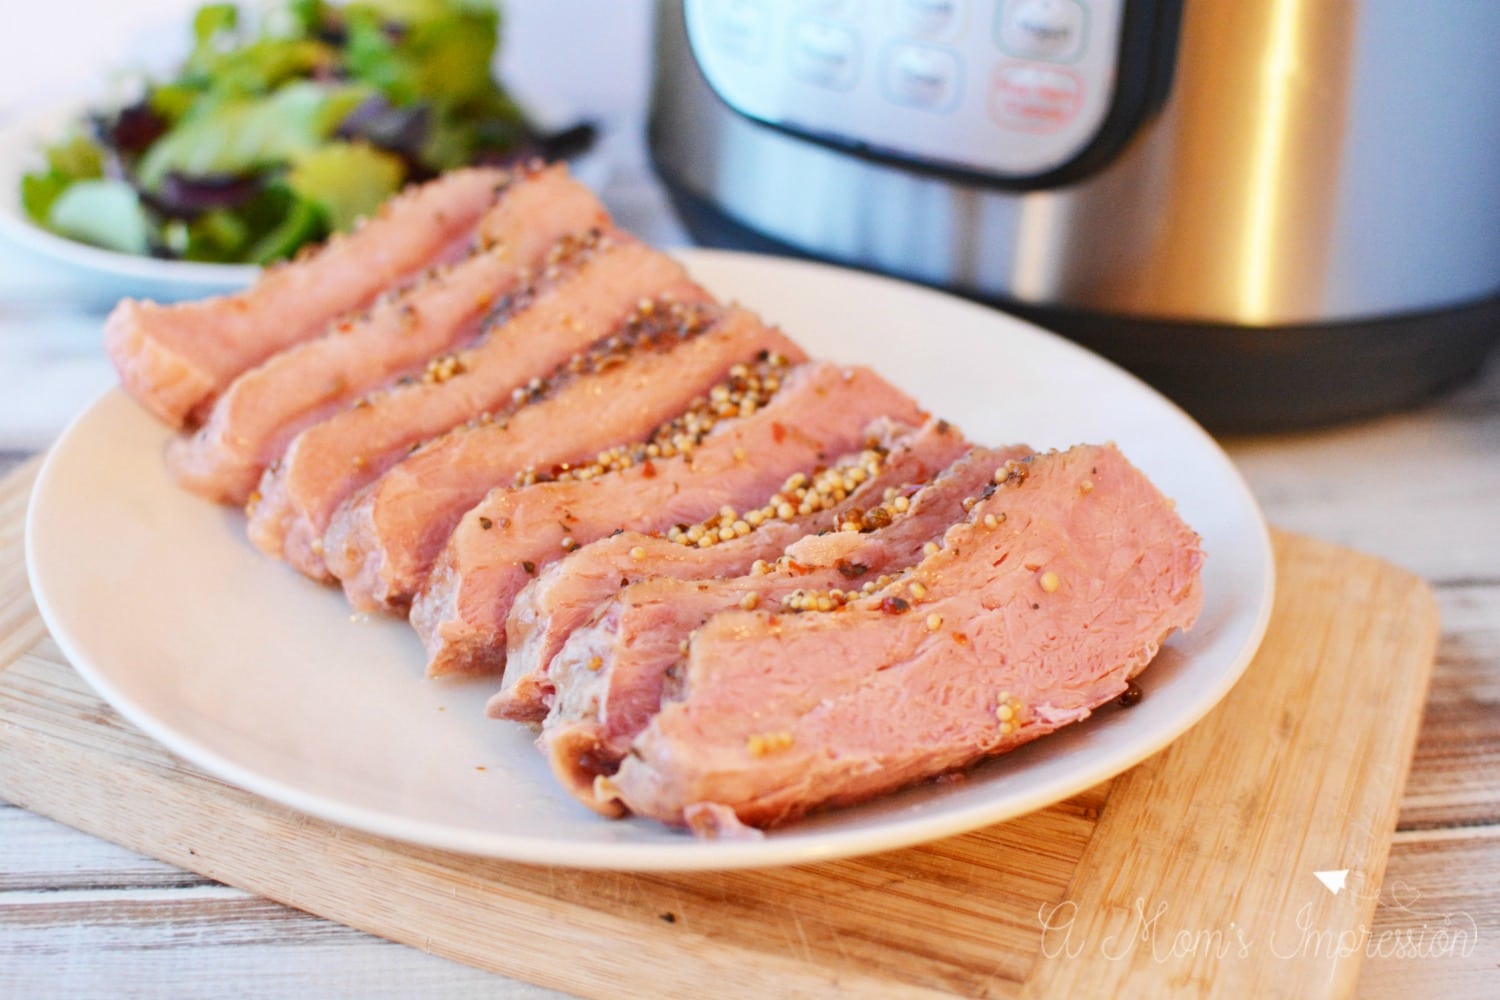 Instant Pot Corned Beef Recipe is delicious traditional Irish Dinner